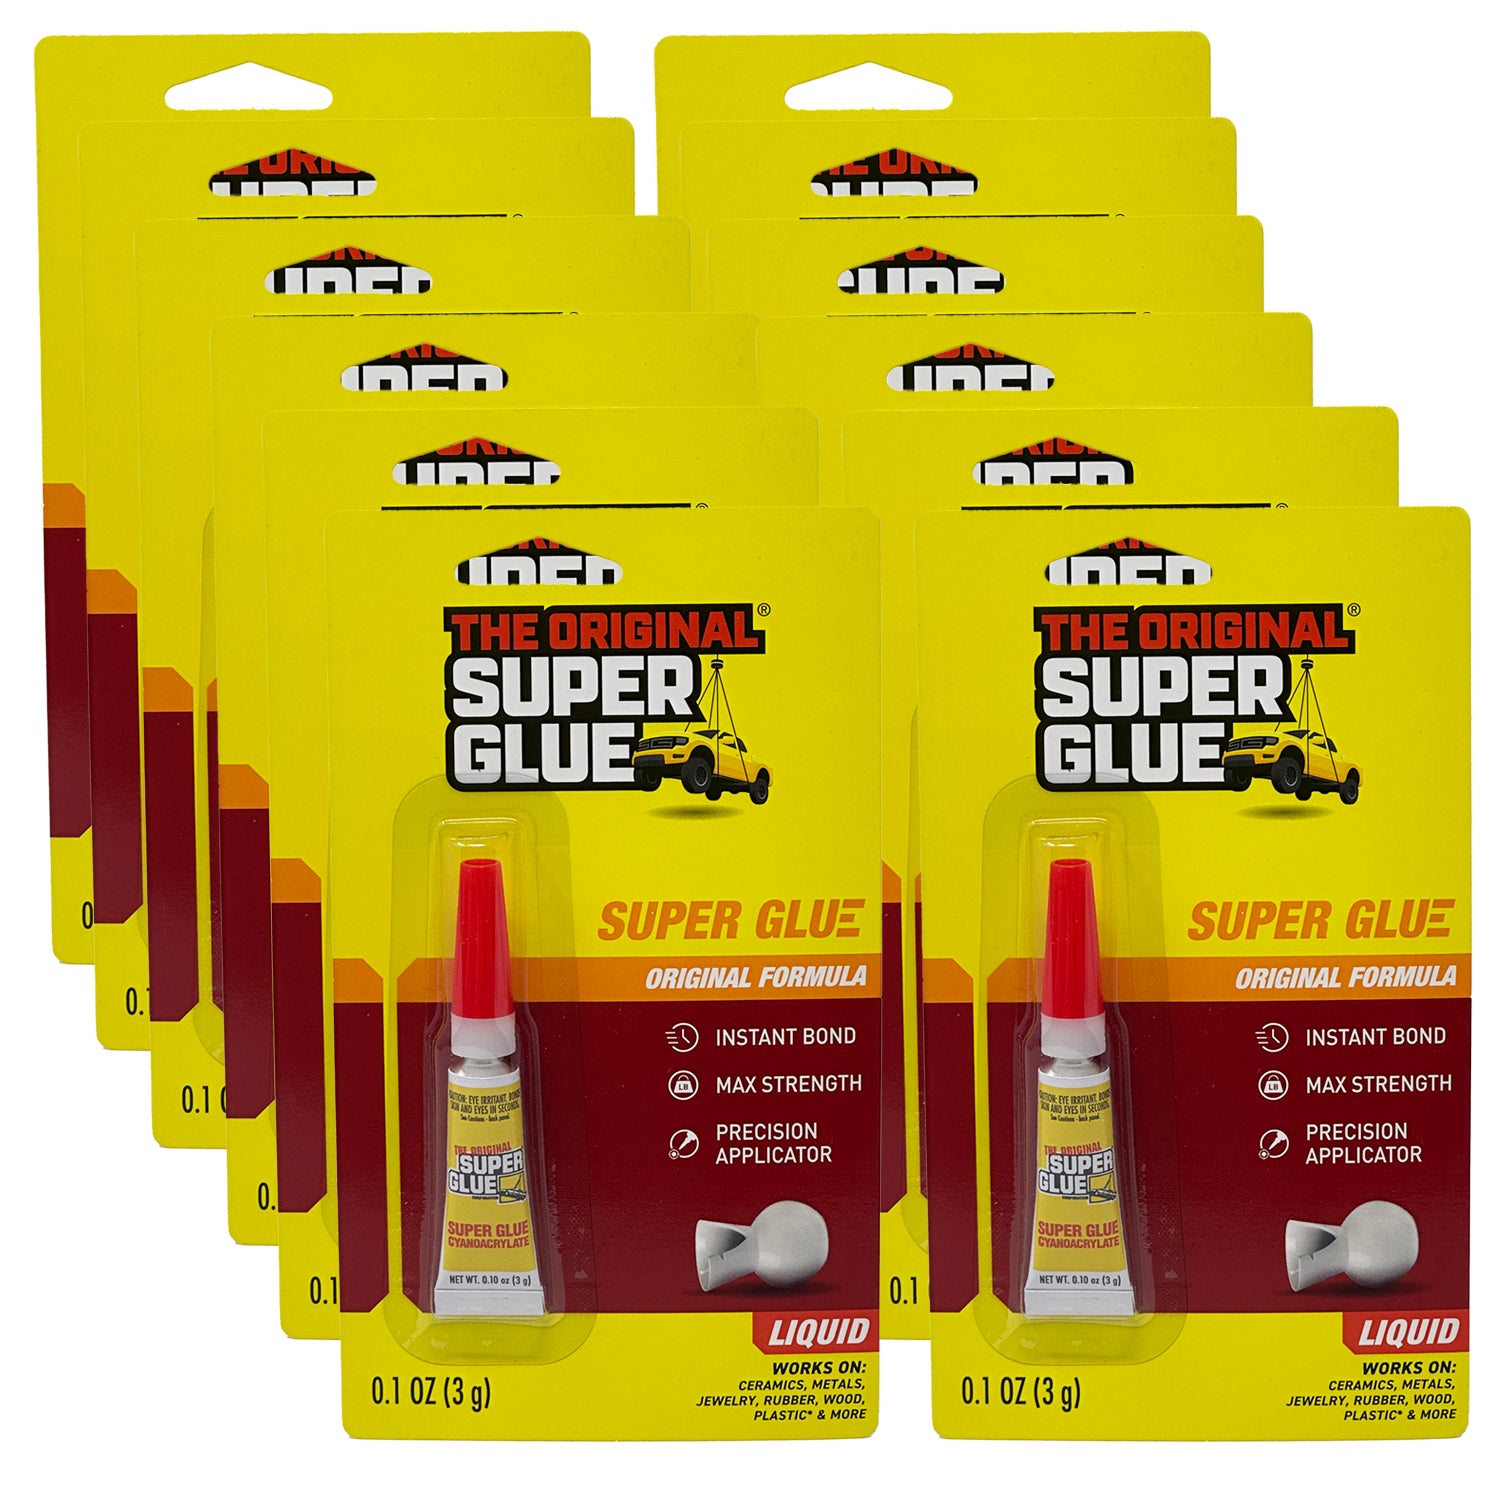 Super Glue Original Formula, 0.1 OZ - Clear Glue for Plastic, Wood, Ceramic  Glue Repair - Heavy Duty, Strong Adhesive - Multipurpose Super Glue for  Rubber, Shoes and More, 6 Packs by GOSO Direct